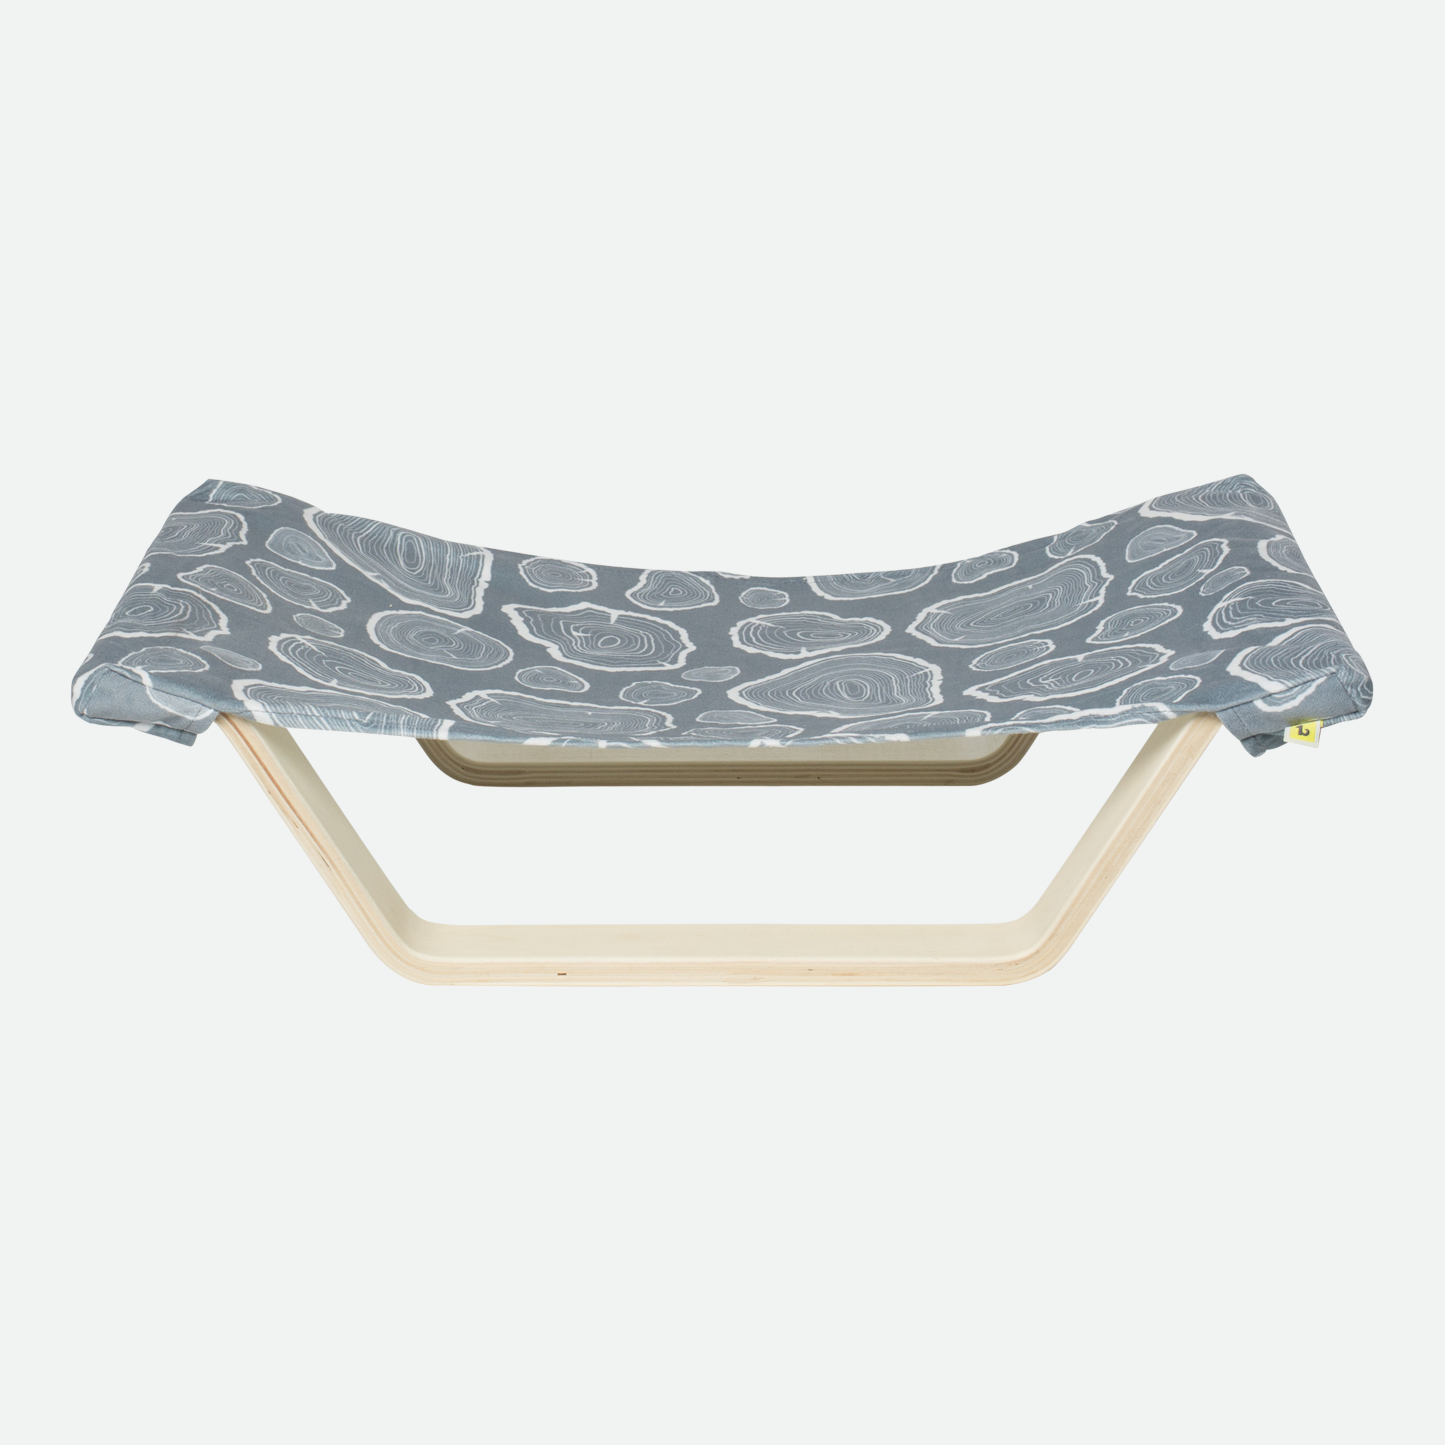 Wood hammock bed for cat, gray